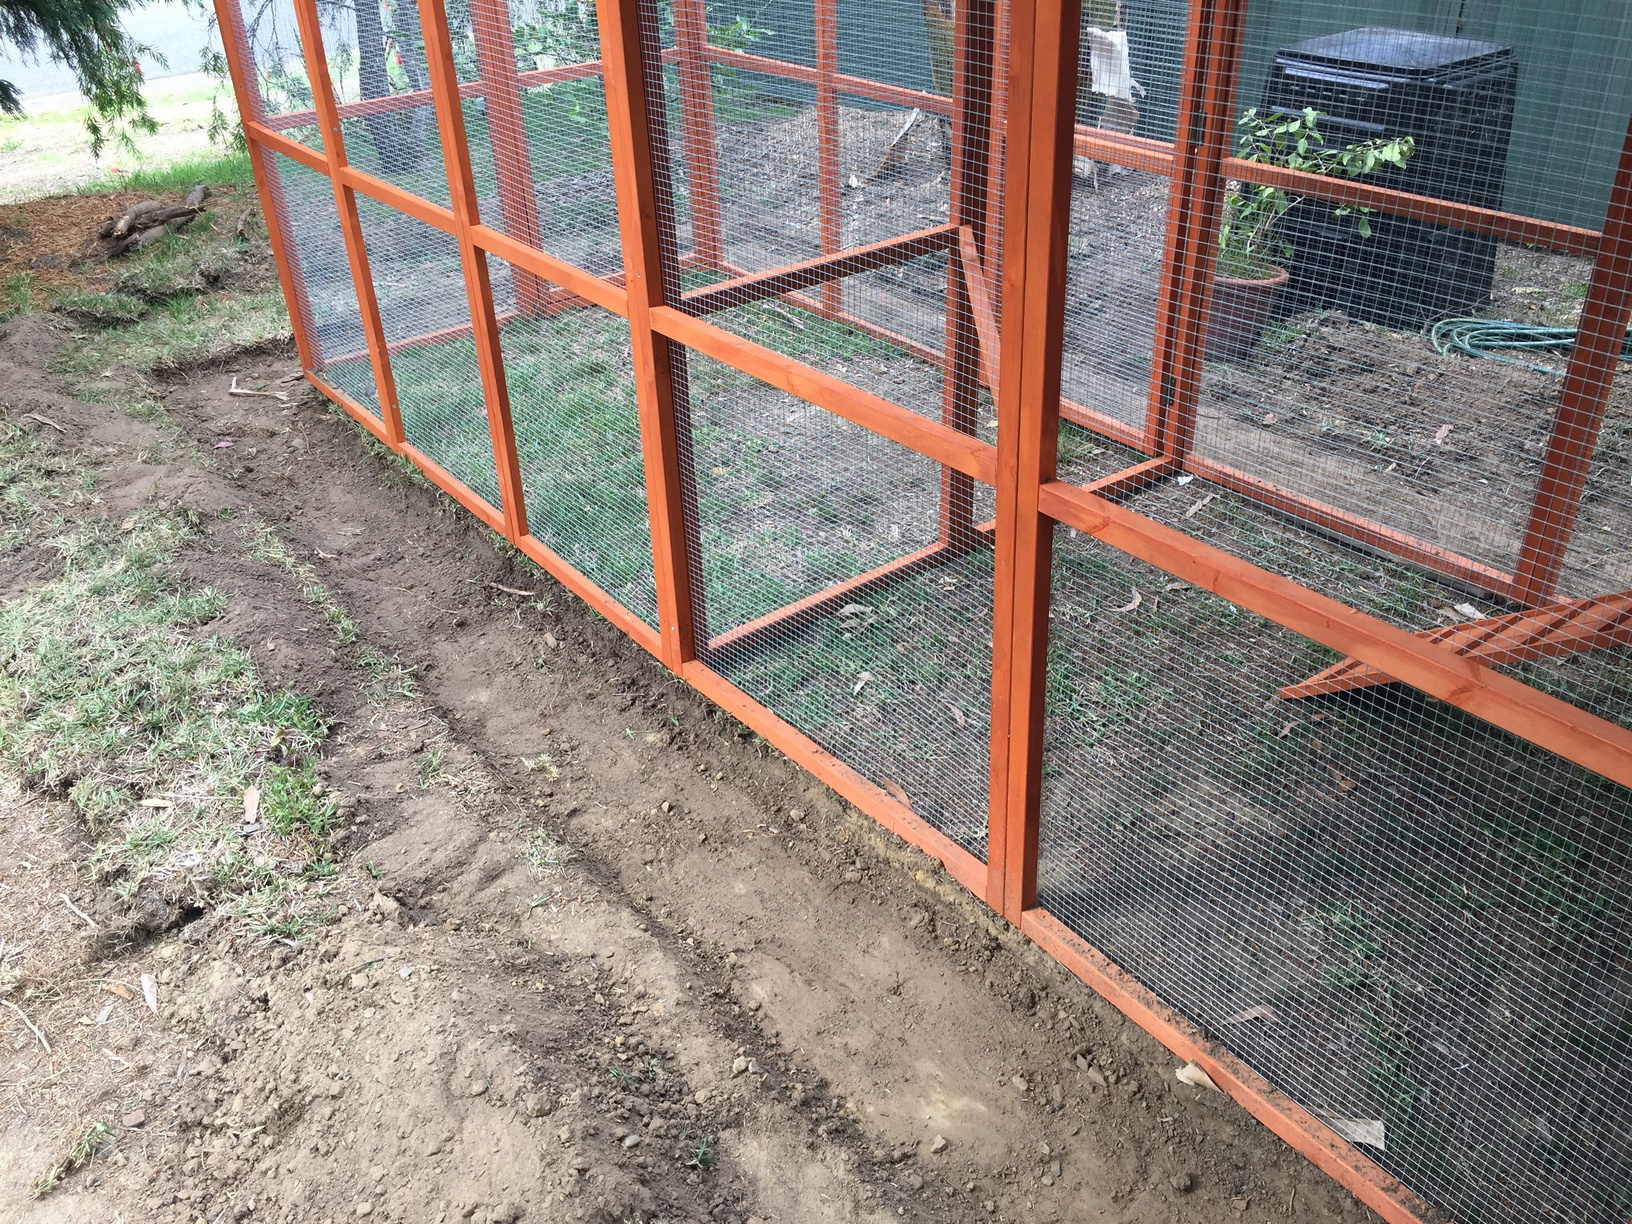 Another view of the shallow trench around the coop